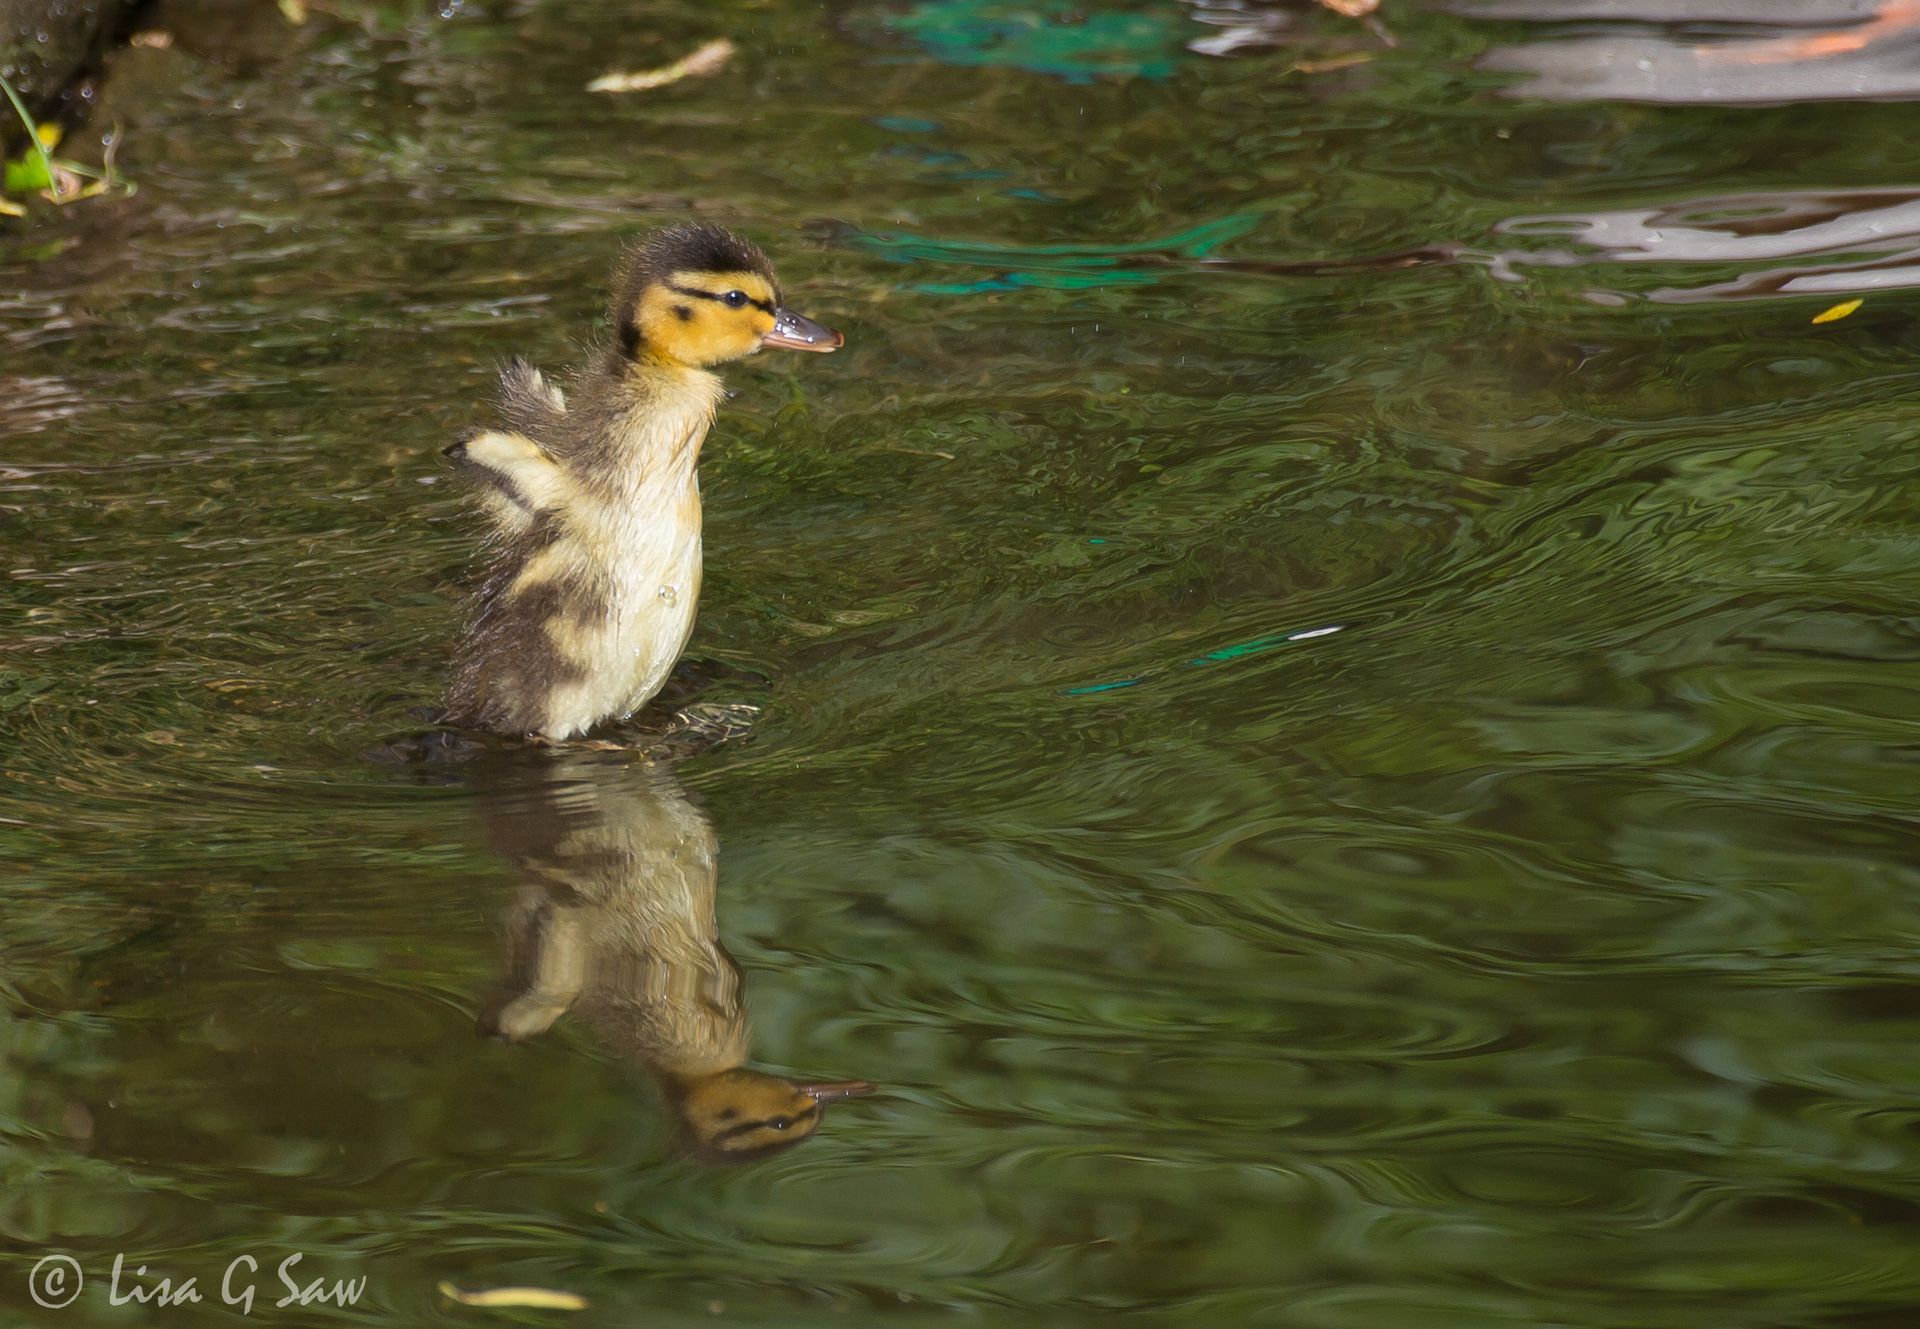 Mallard duckling in water raised up flapping tiny wings